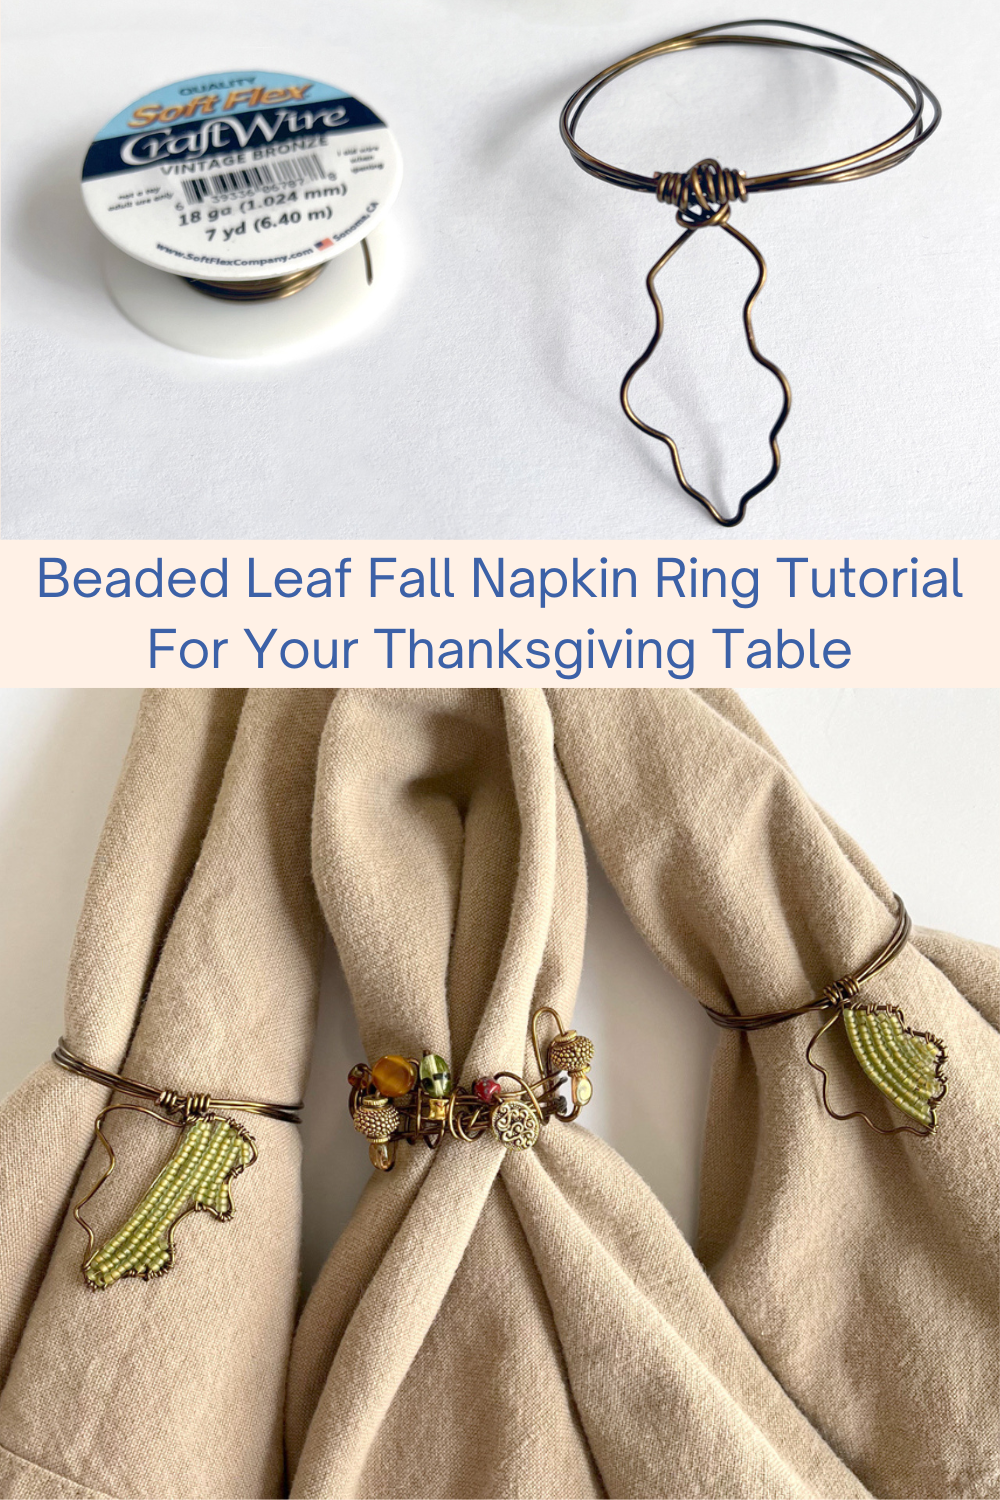 Beaded Leaf Fall Napkin Ring Tutorial For Your Thanksgiving Table Collage